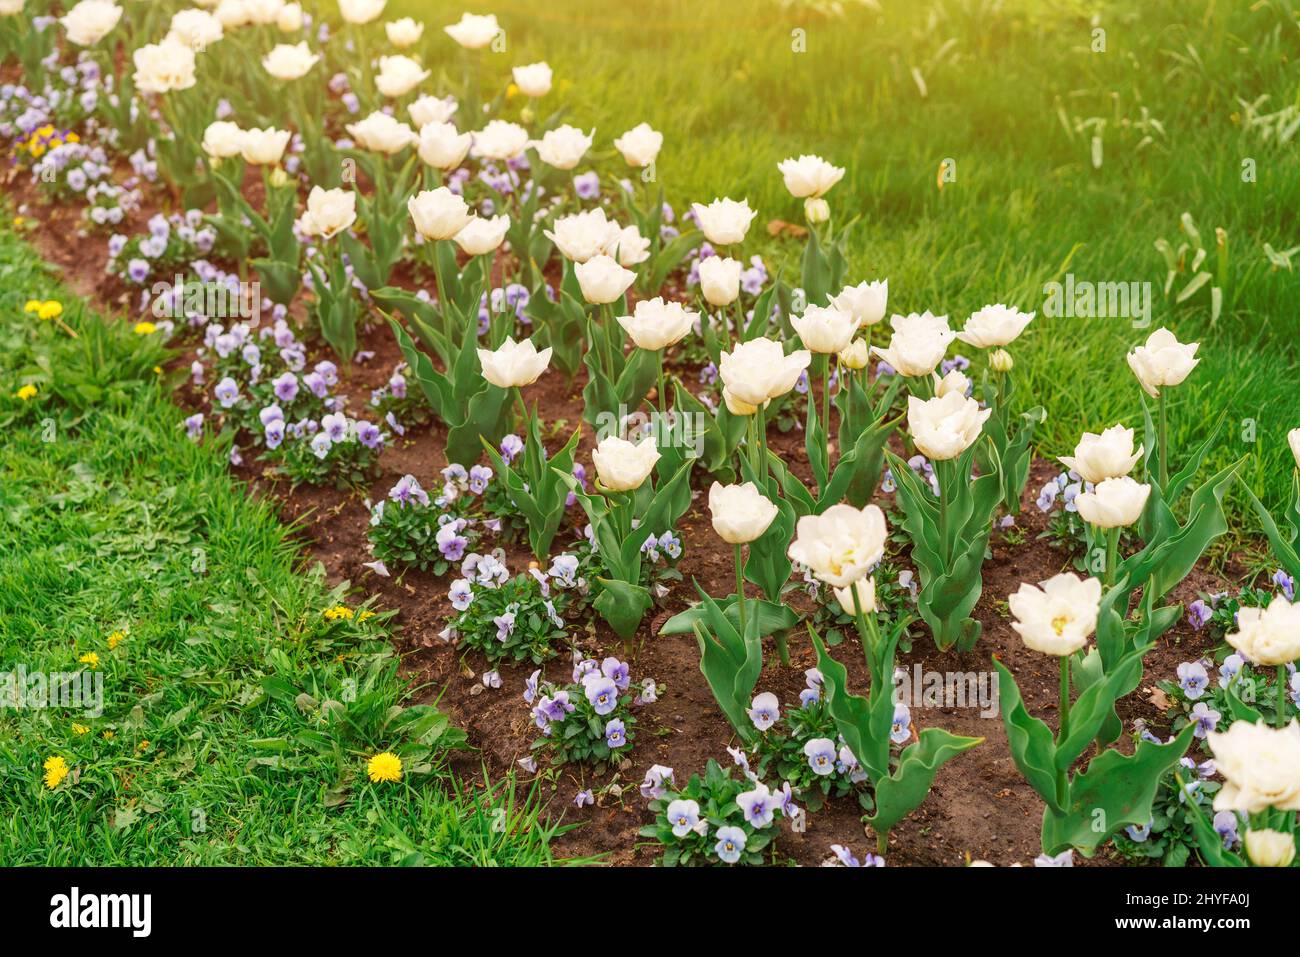 Beautiful white tulips flowerbed close-up. Floral background